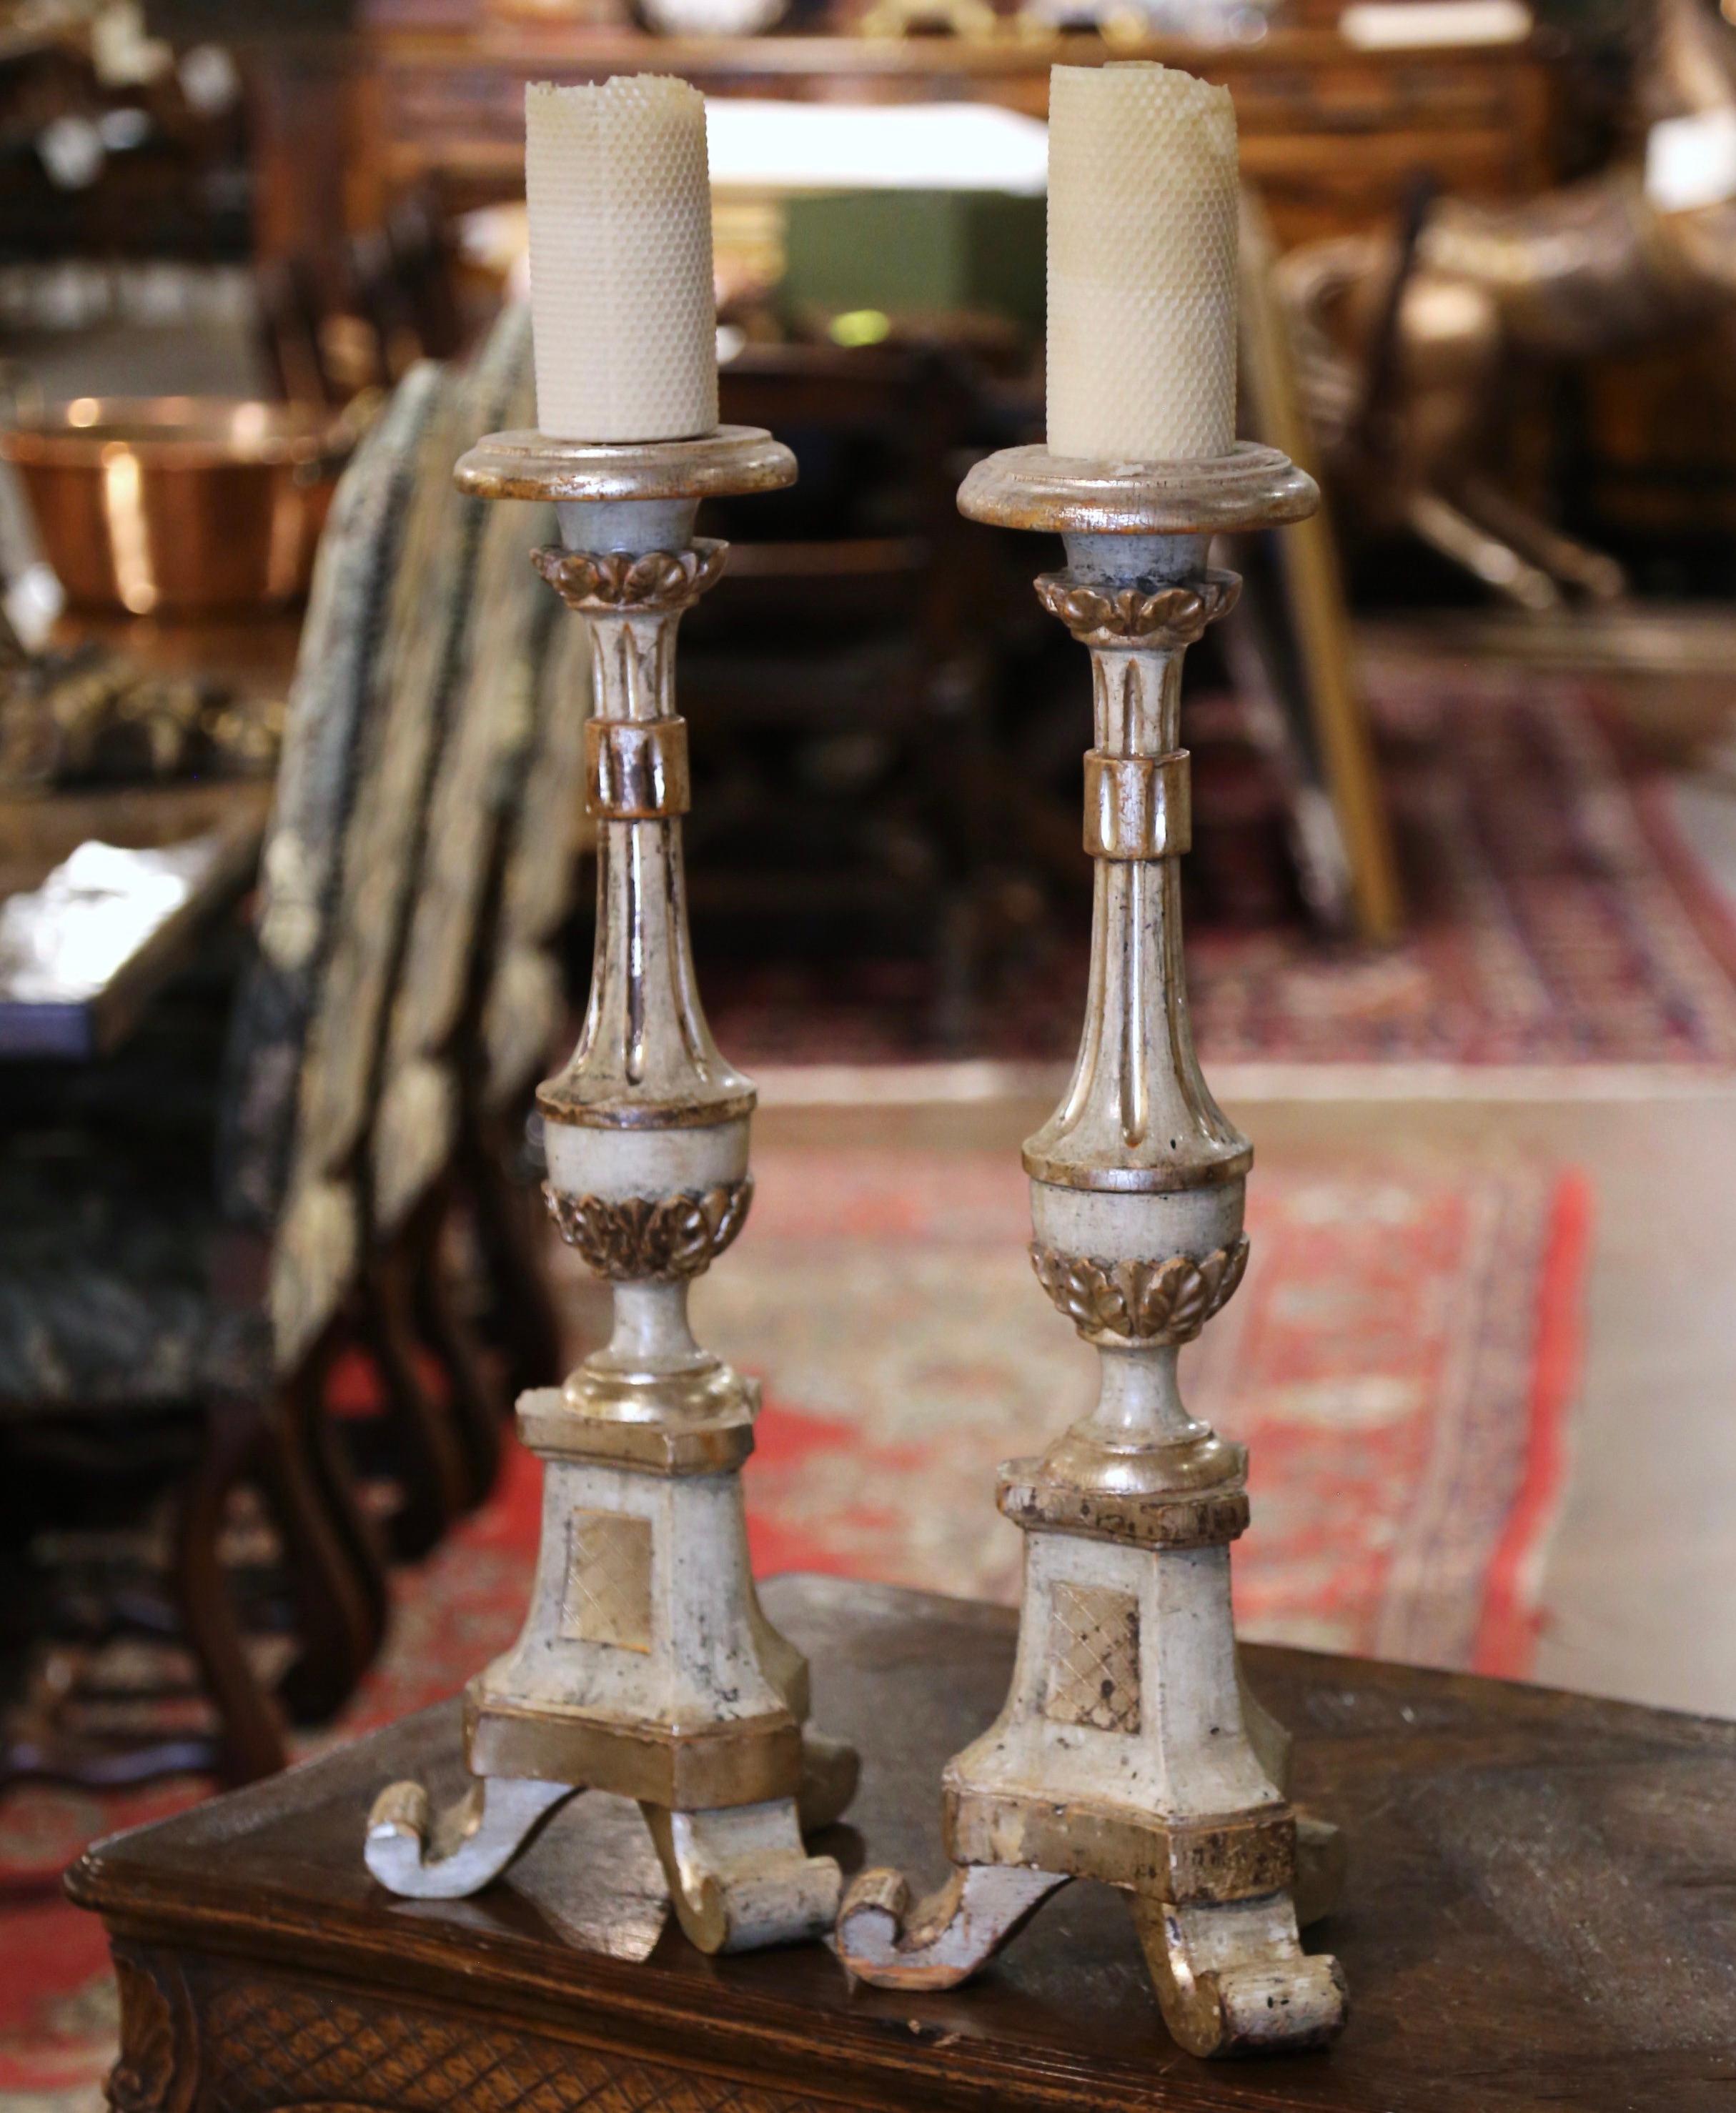 Add an air of drama and elegance to your home with this elegant pair of antique candlesticks. Crafted in Italy circa 1880, each candle holder stands on a tripod base ending with scrolled feet; the tall decorative fluted stem is embellished with hand